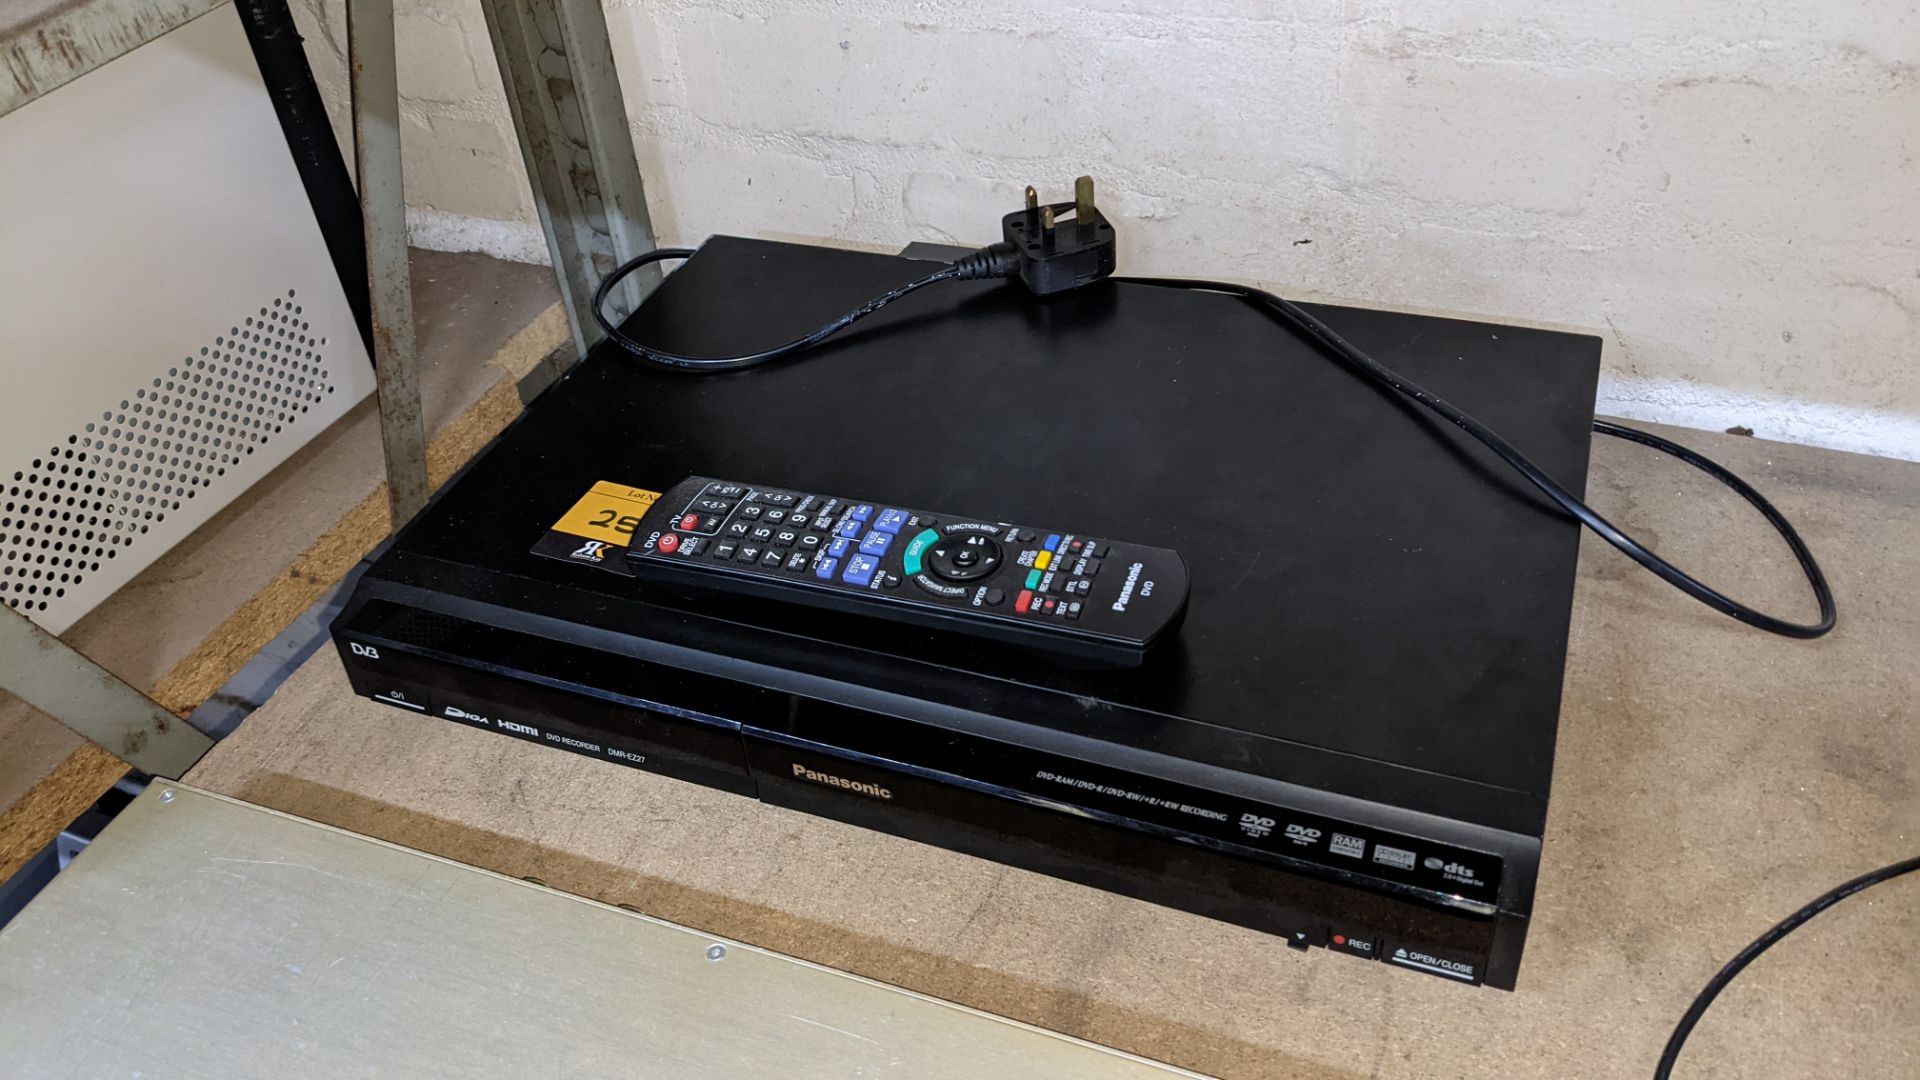 DVD recorder with remote control - Image 6 of 7